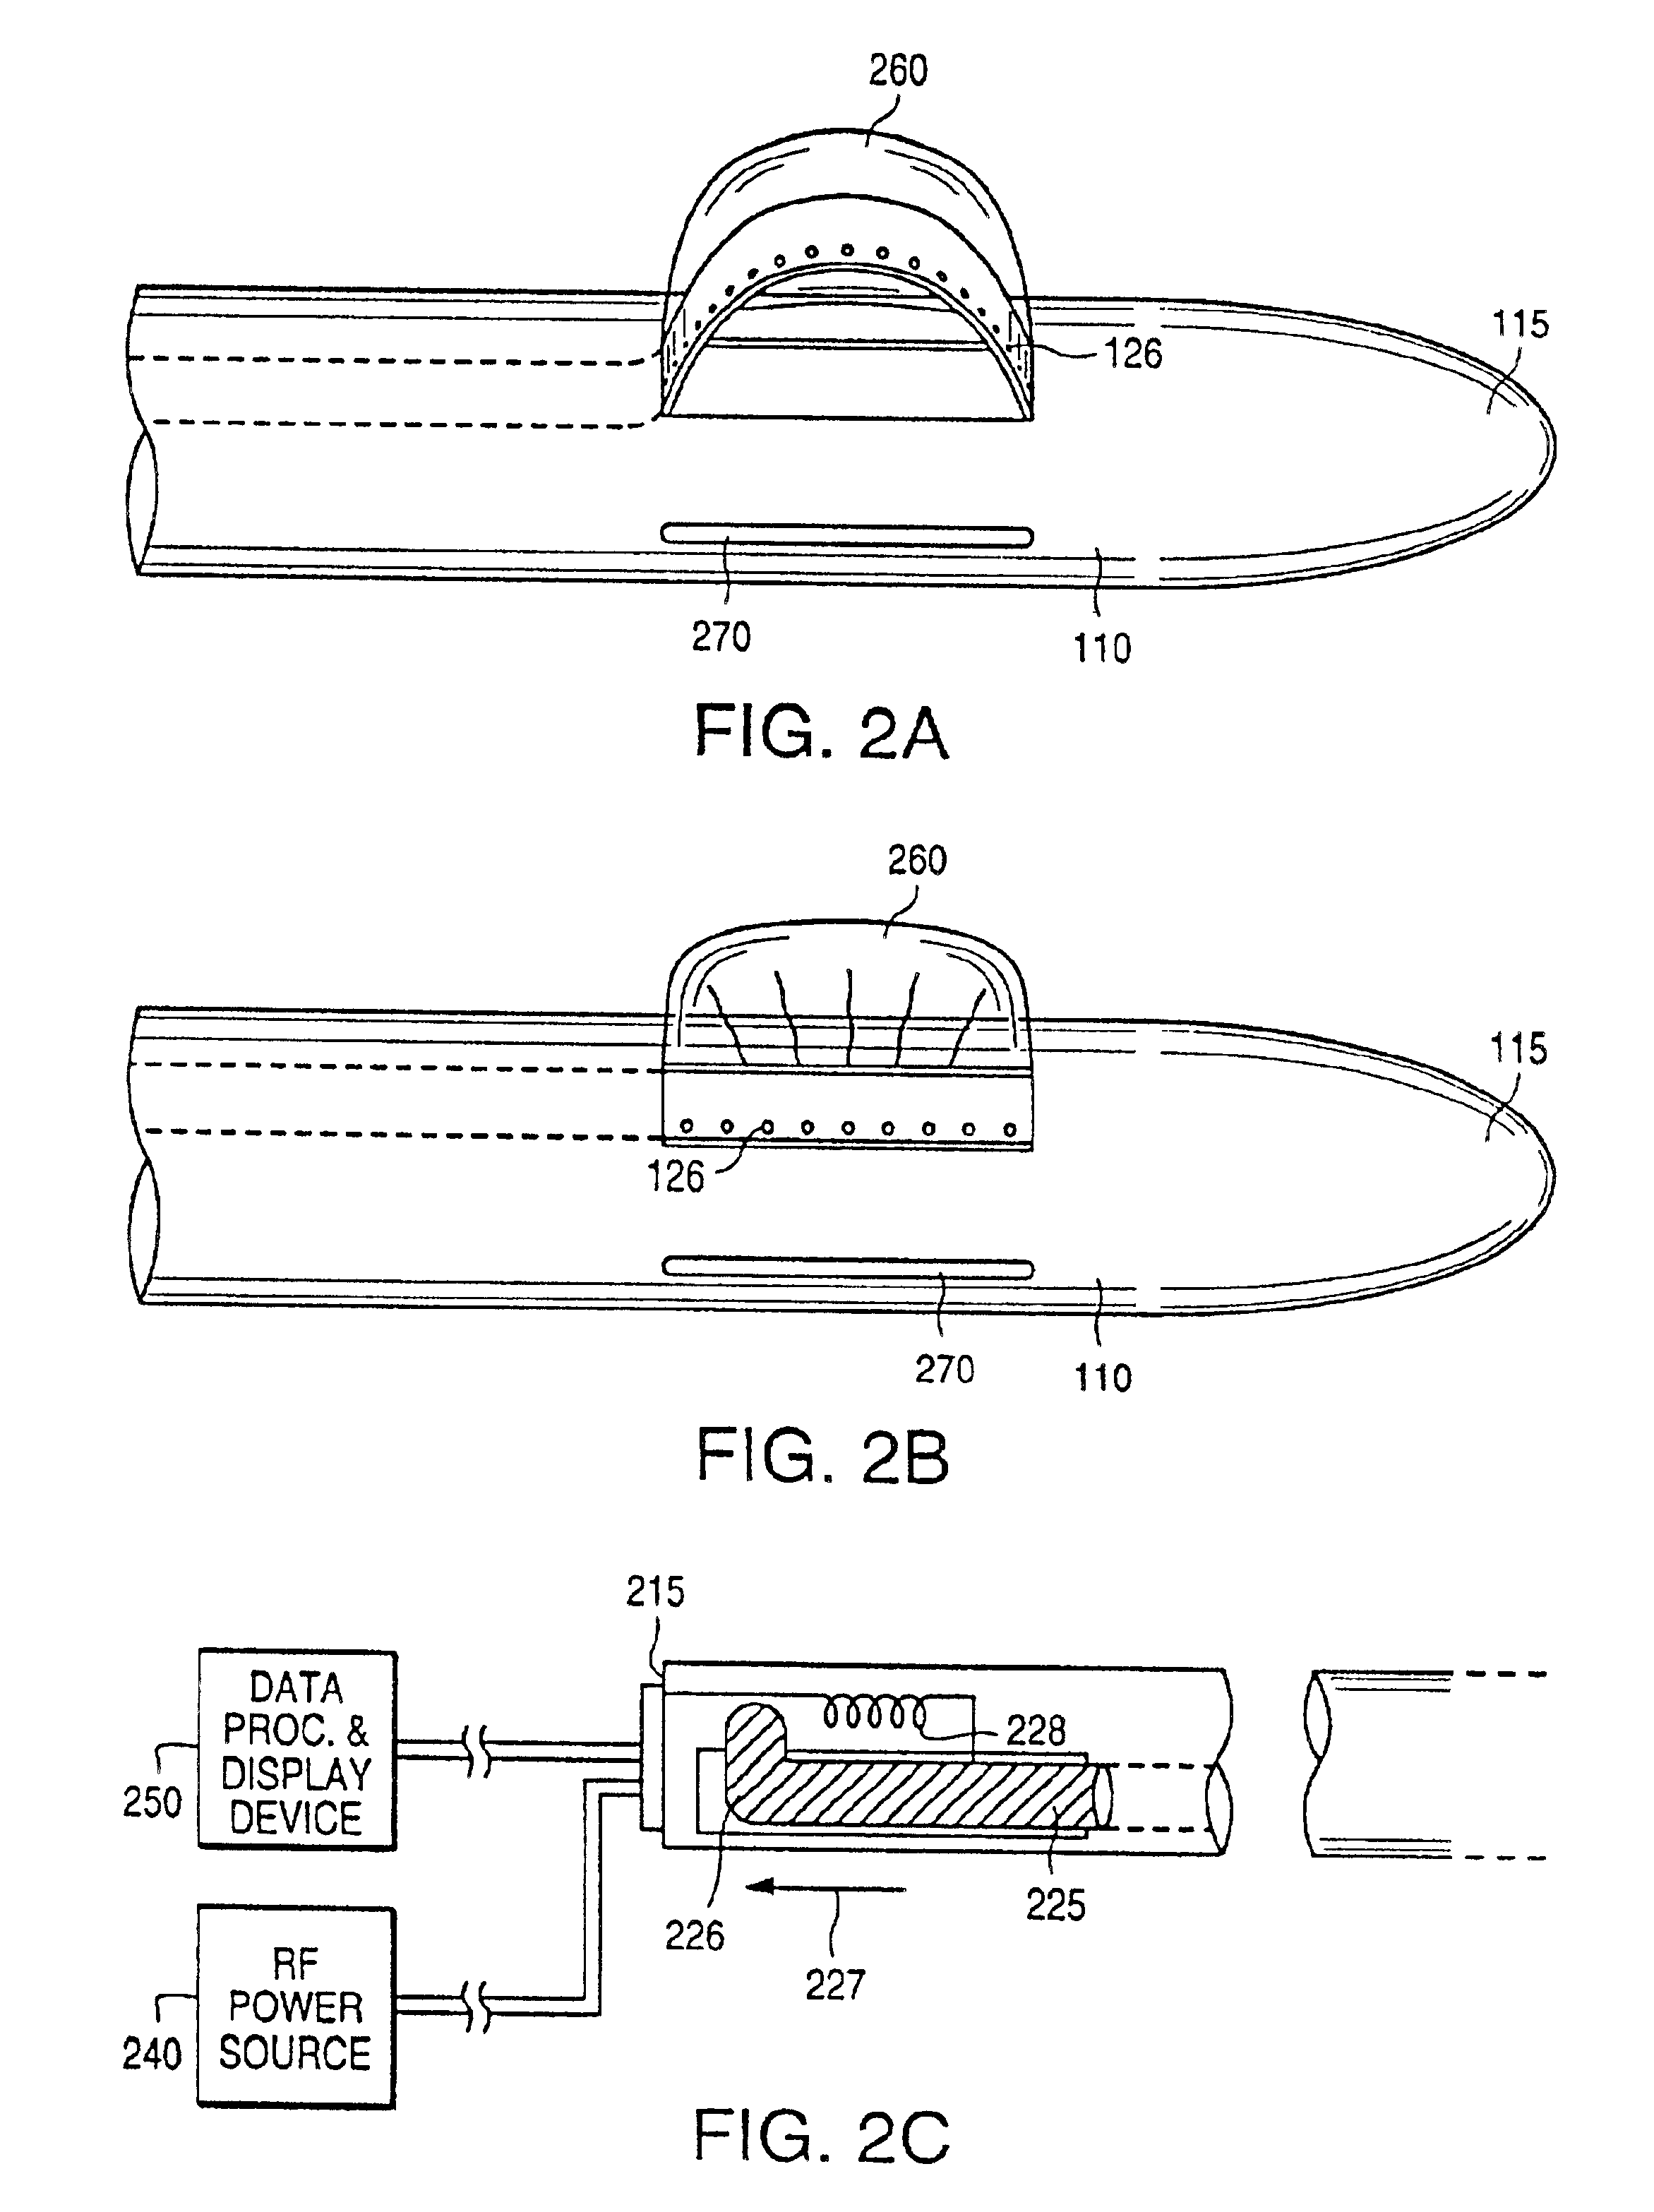 Excisional biopsy devices and methods